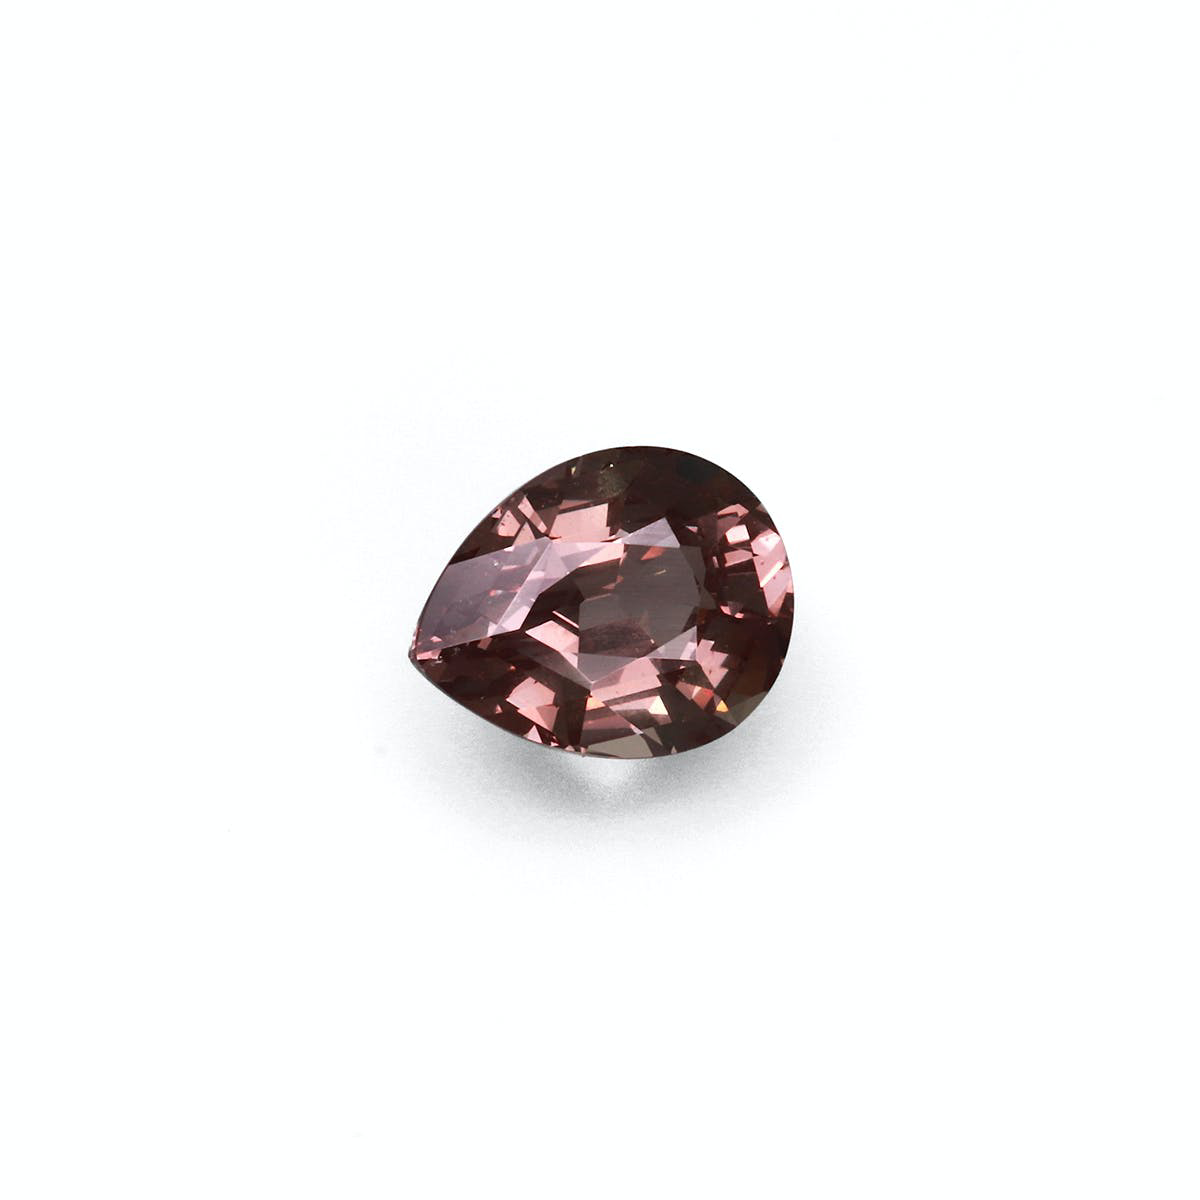 Picture of Brown Colour Change Garnet 3.35ct - 10x8mm (CG0045)